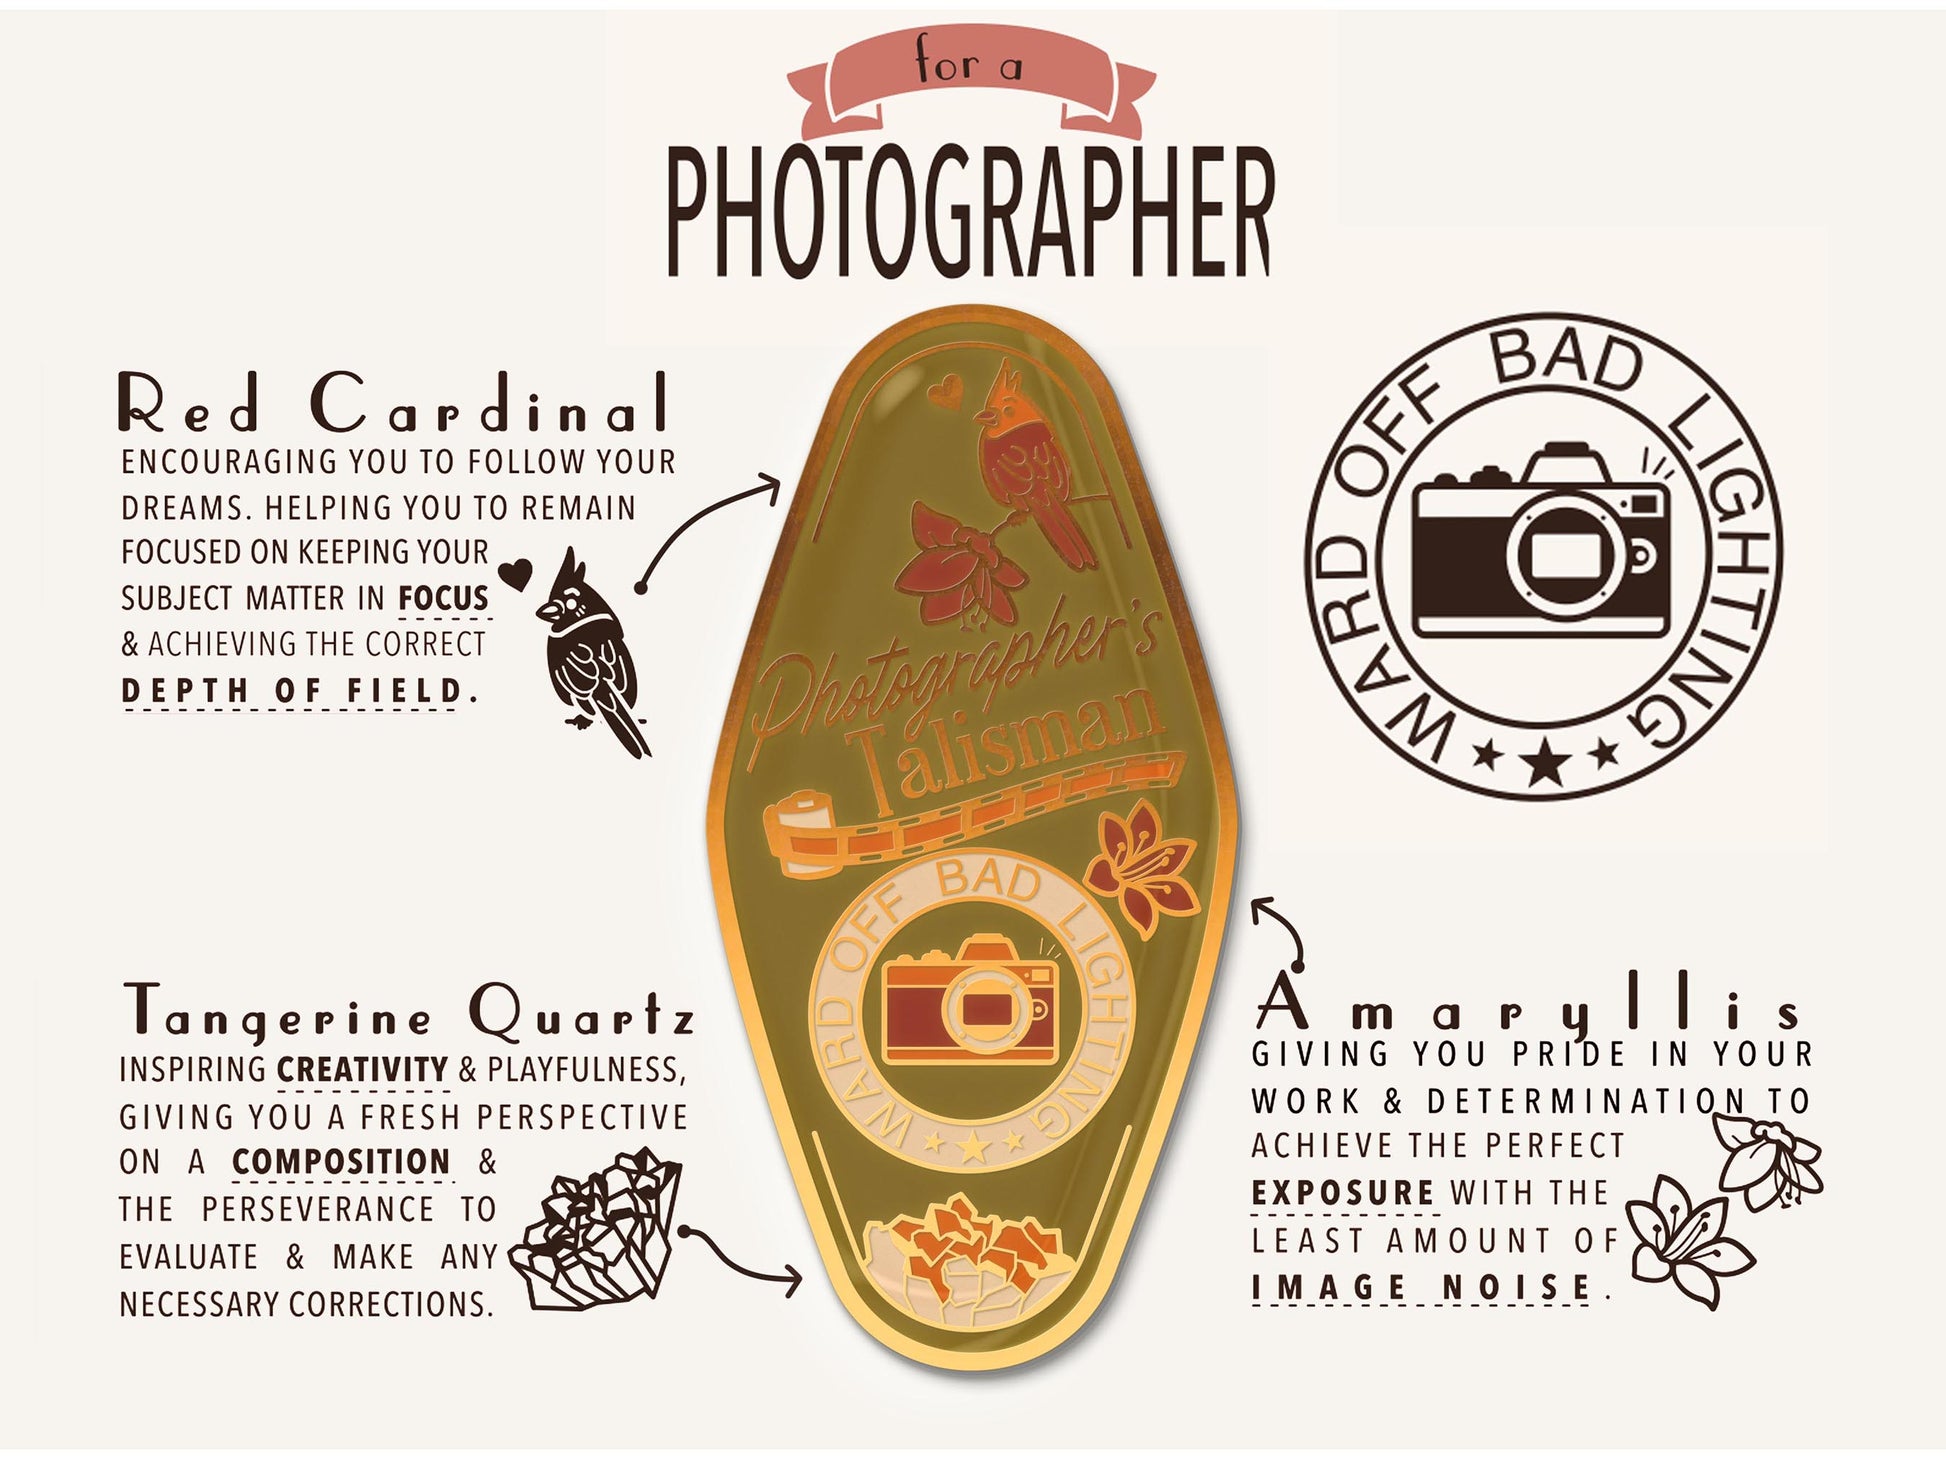 A illustrated diagram outline the symbolism of the different design elements of the for a photographers Talisman pin. Information includes the meaning of the red cardinal, tangerine quartz and amaryllis